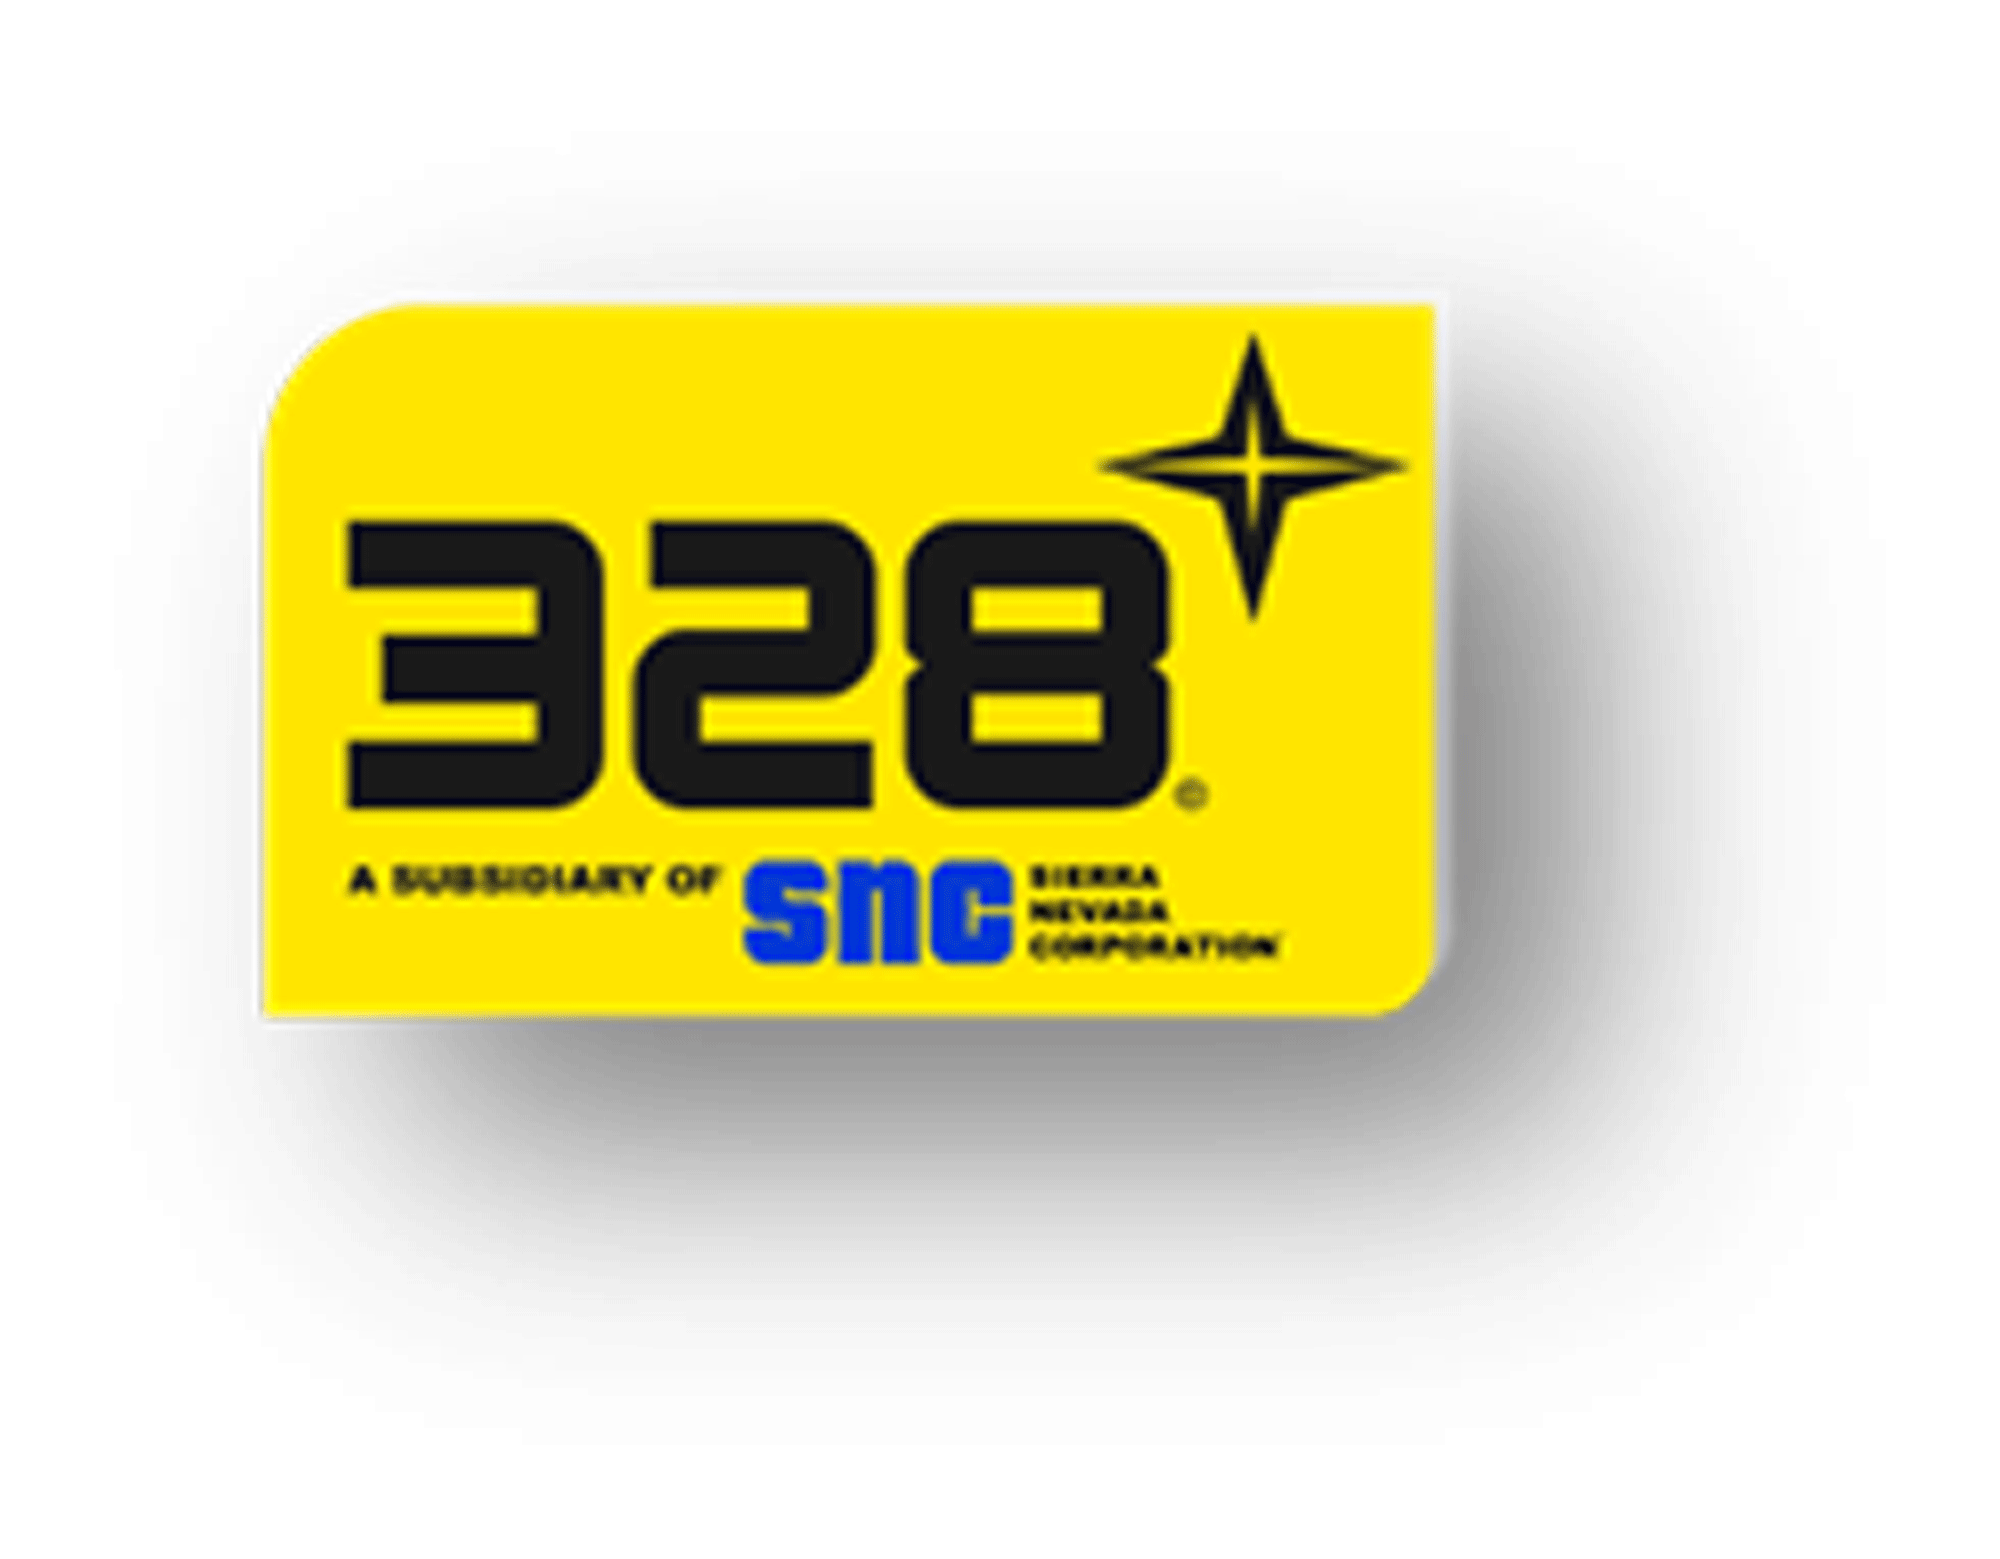 328 Support Services